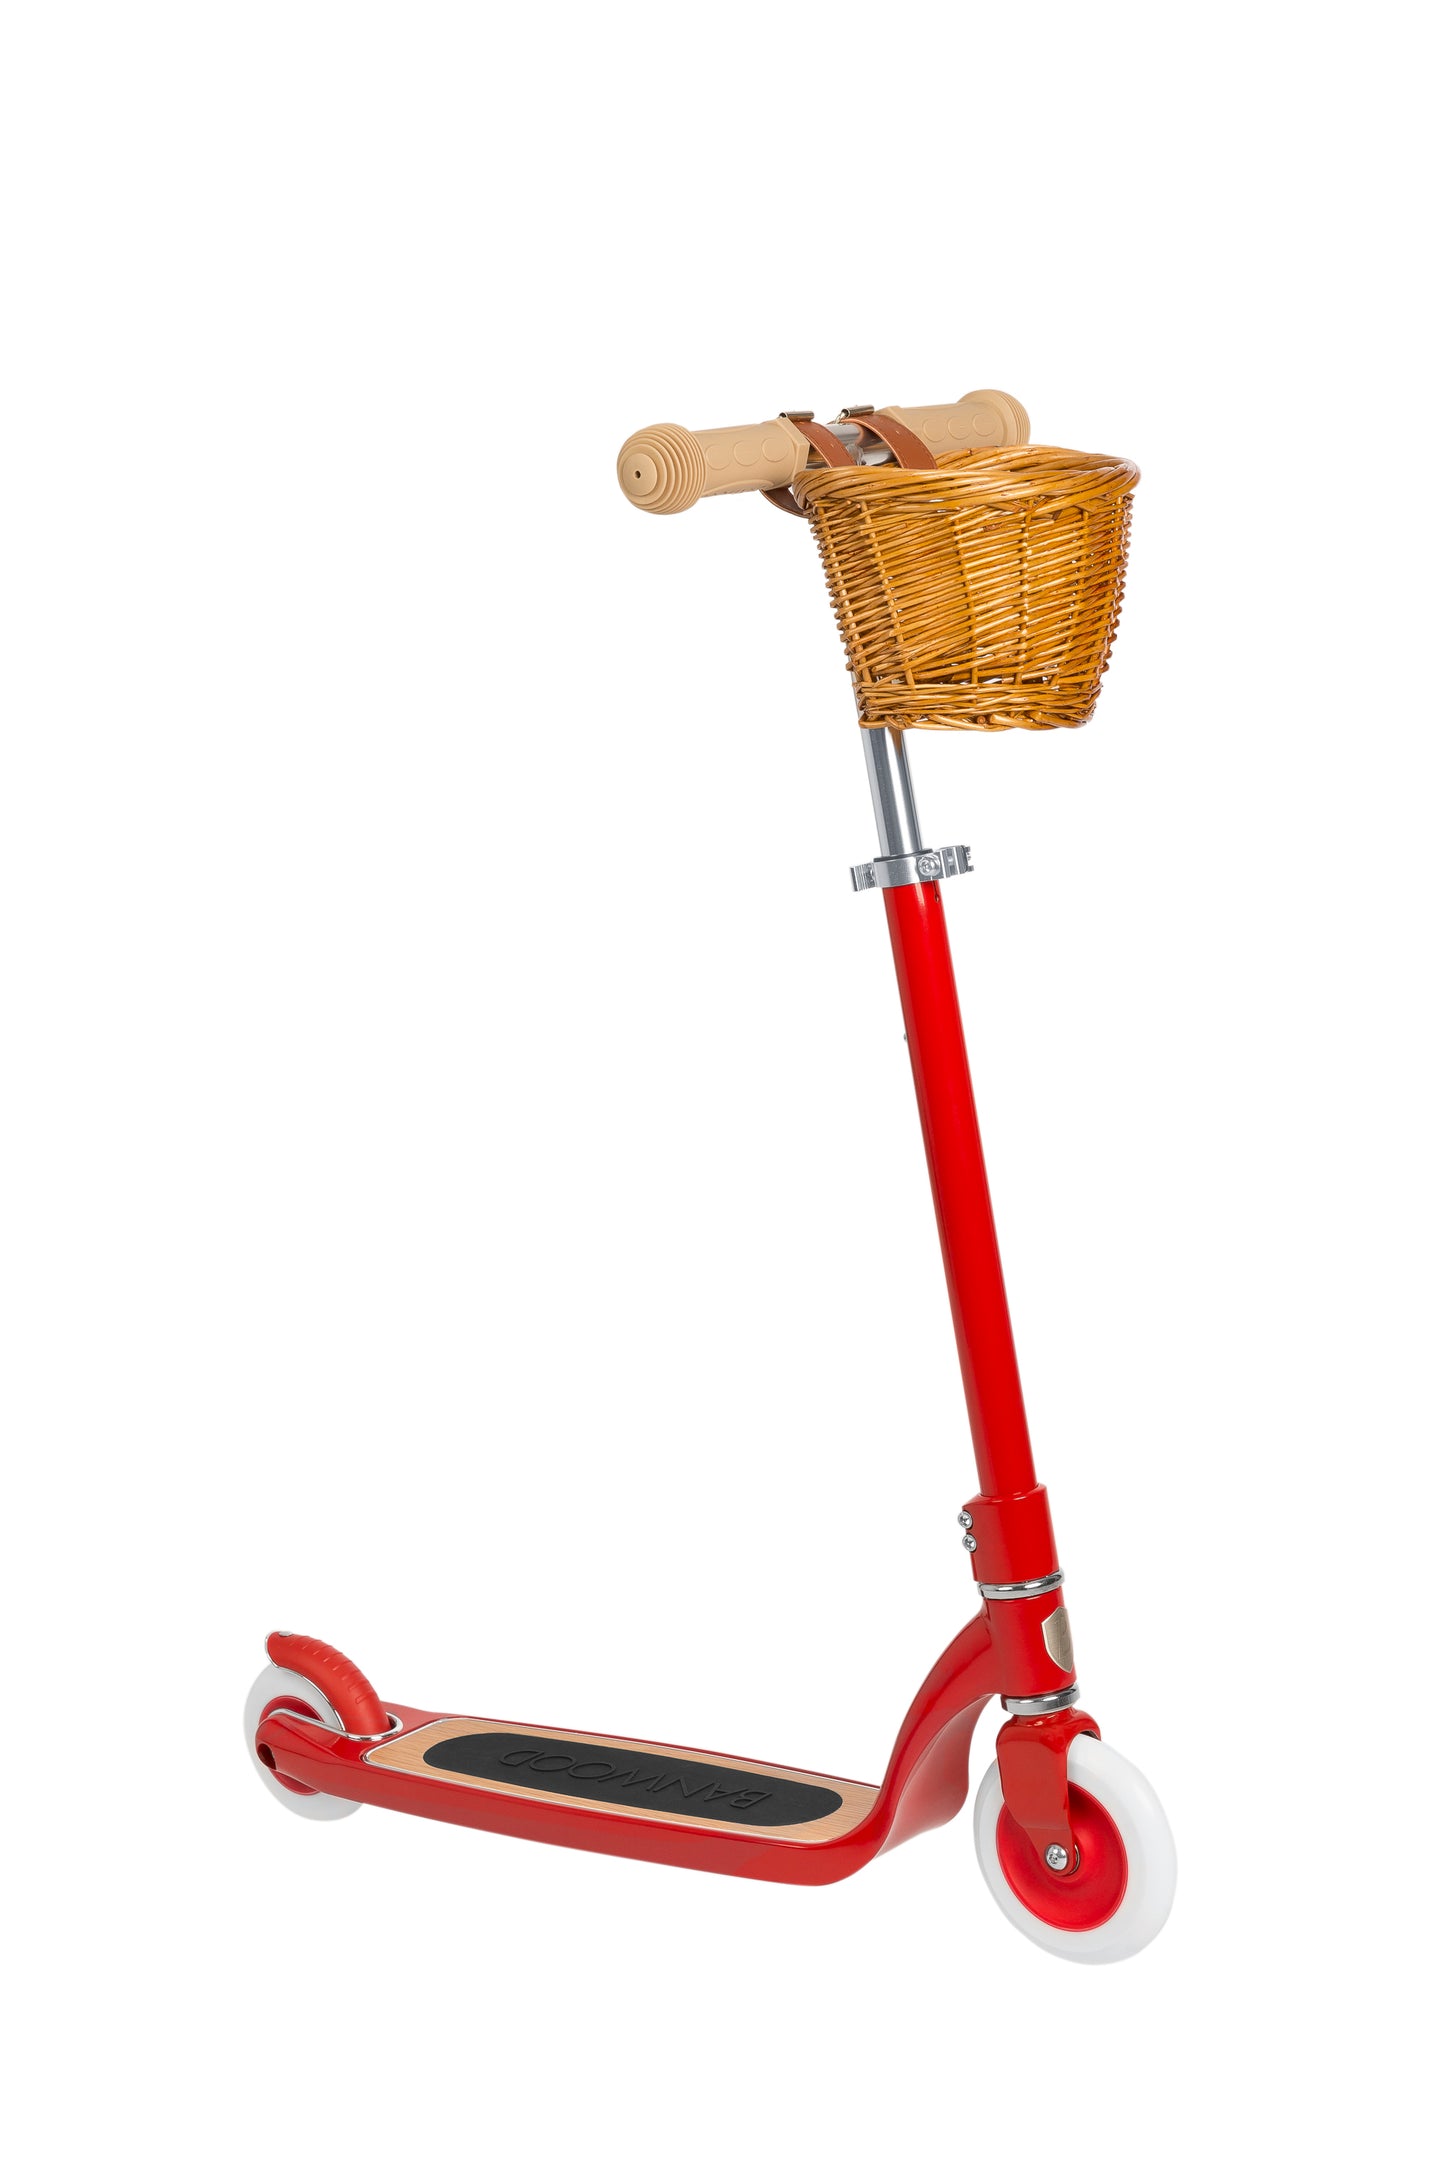 Maxi Scooter